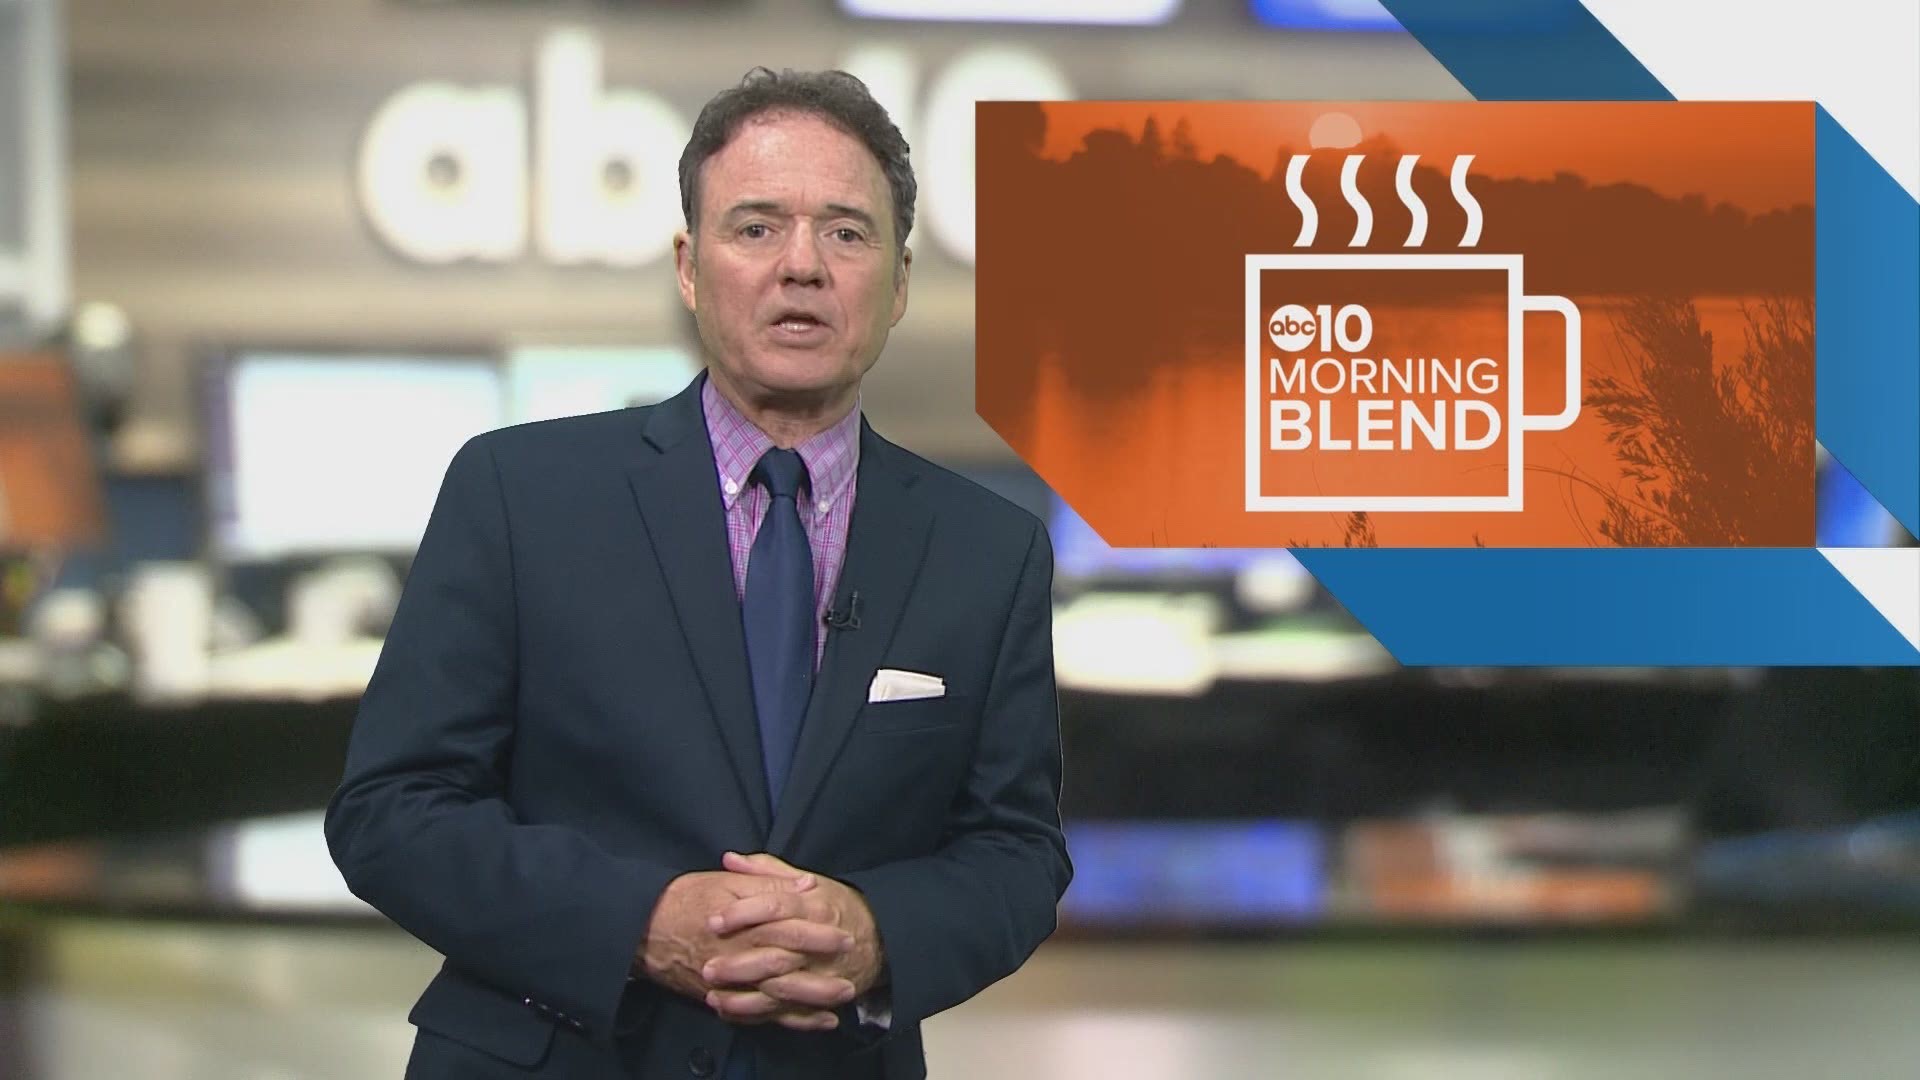 Watch #MorningBlend10 weekdays at 5-7 a.m. for everything you need to know to start your day.